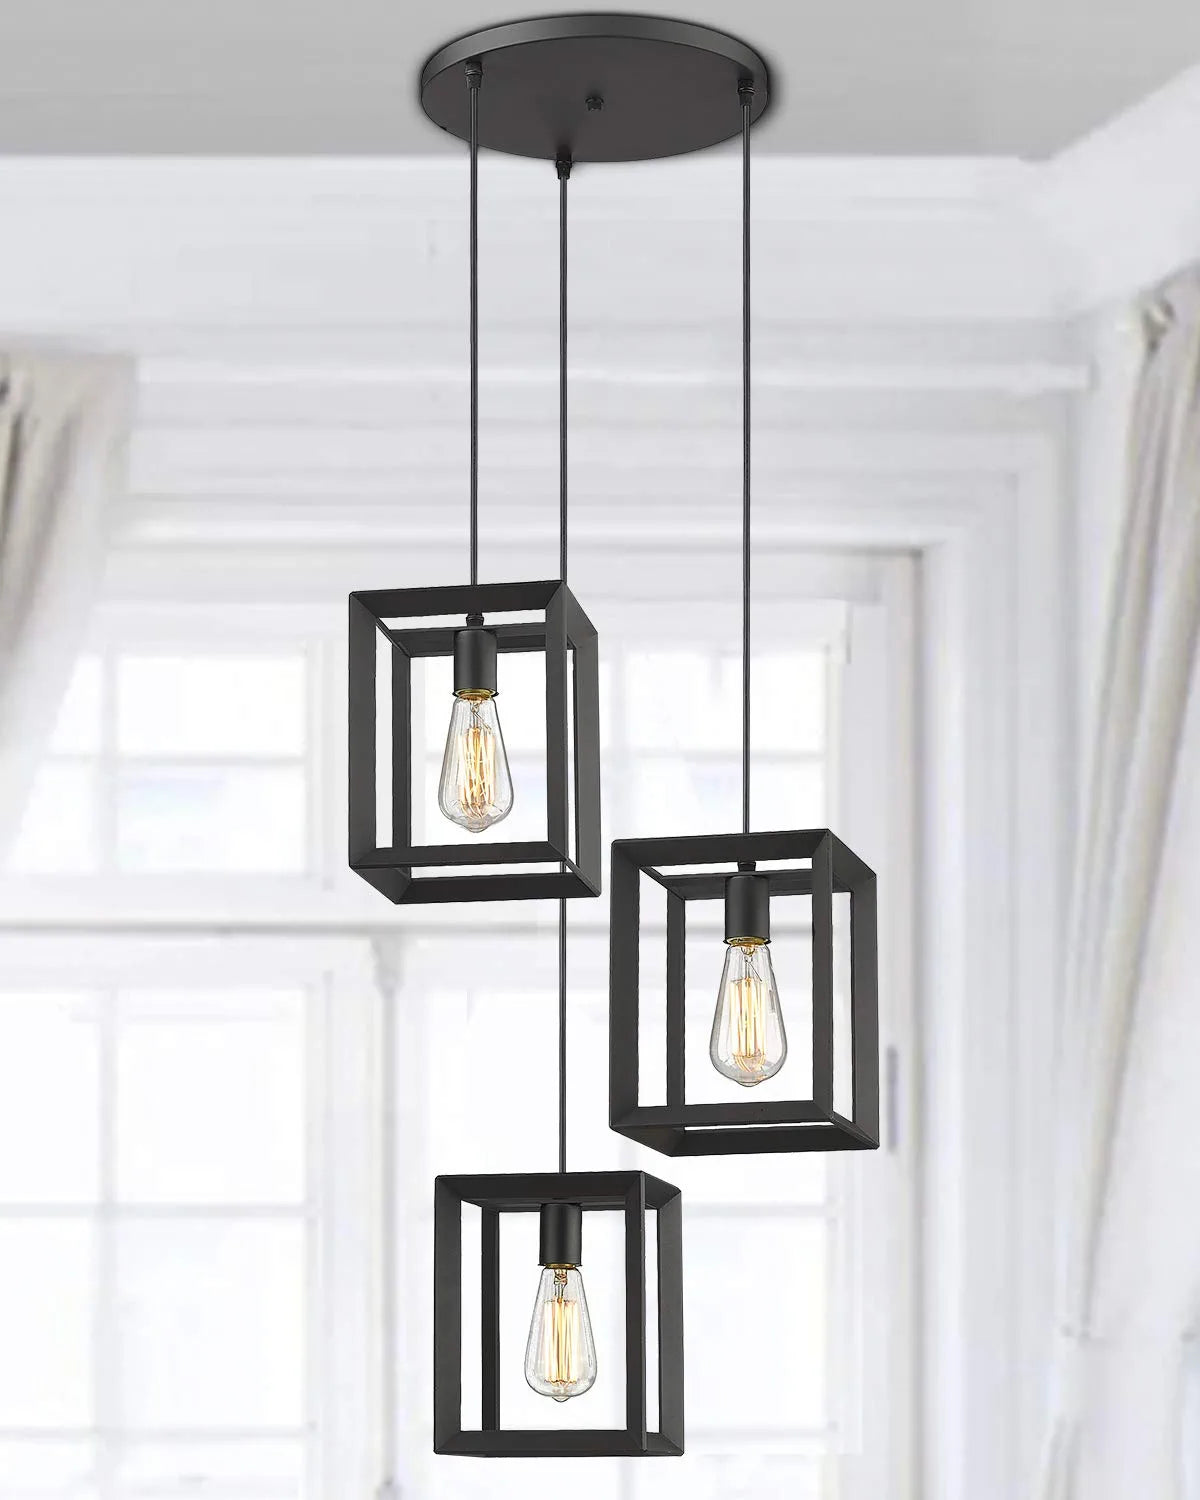 Installing Pendant Lights: A Step-by-Step Guide